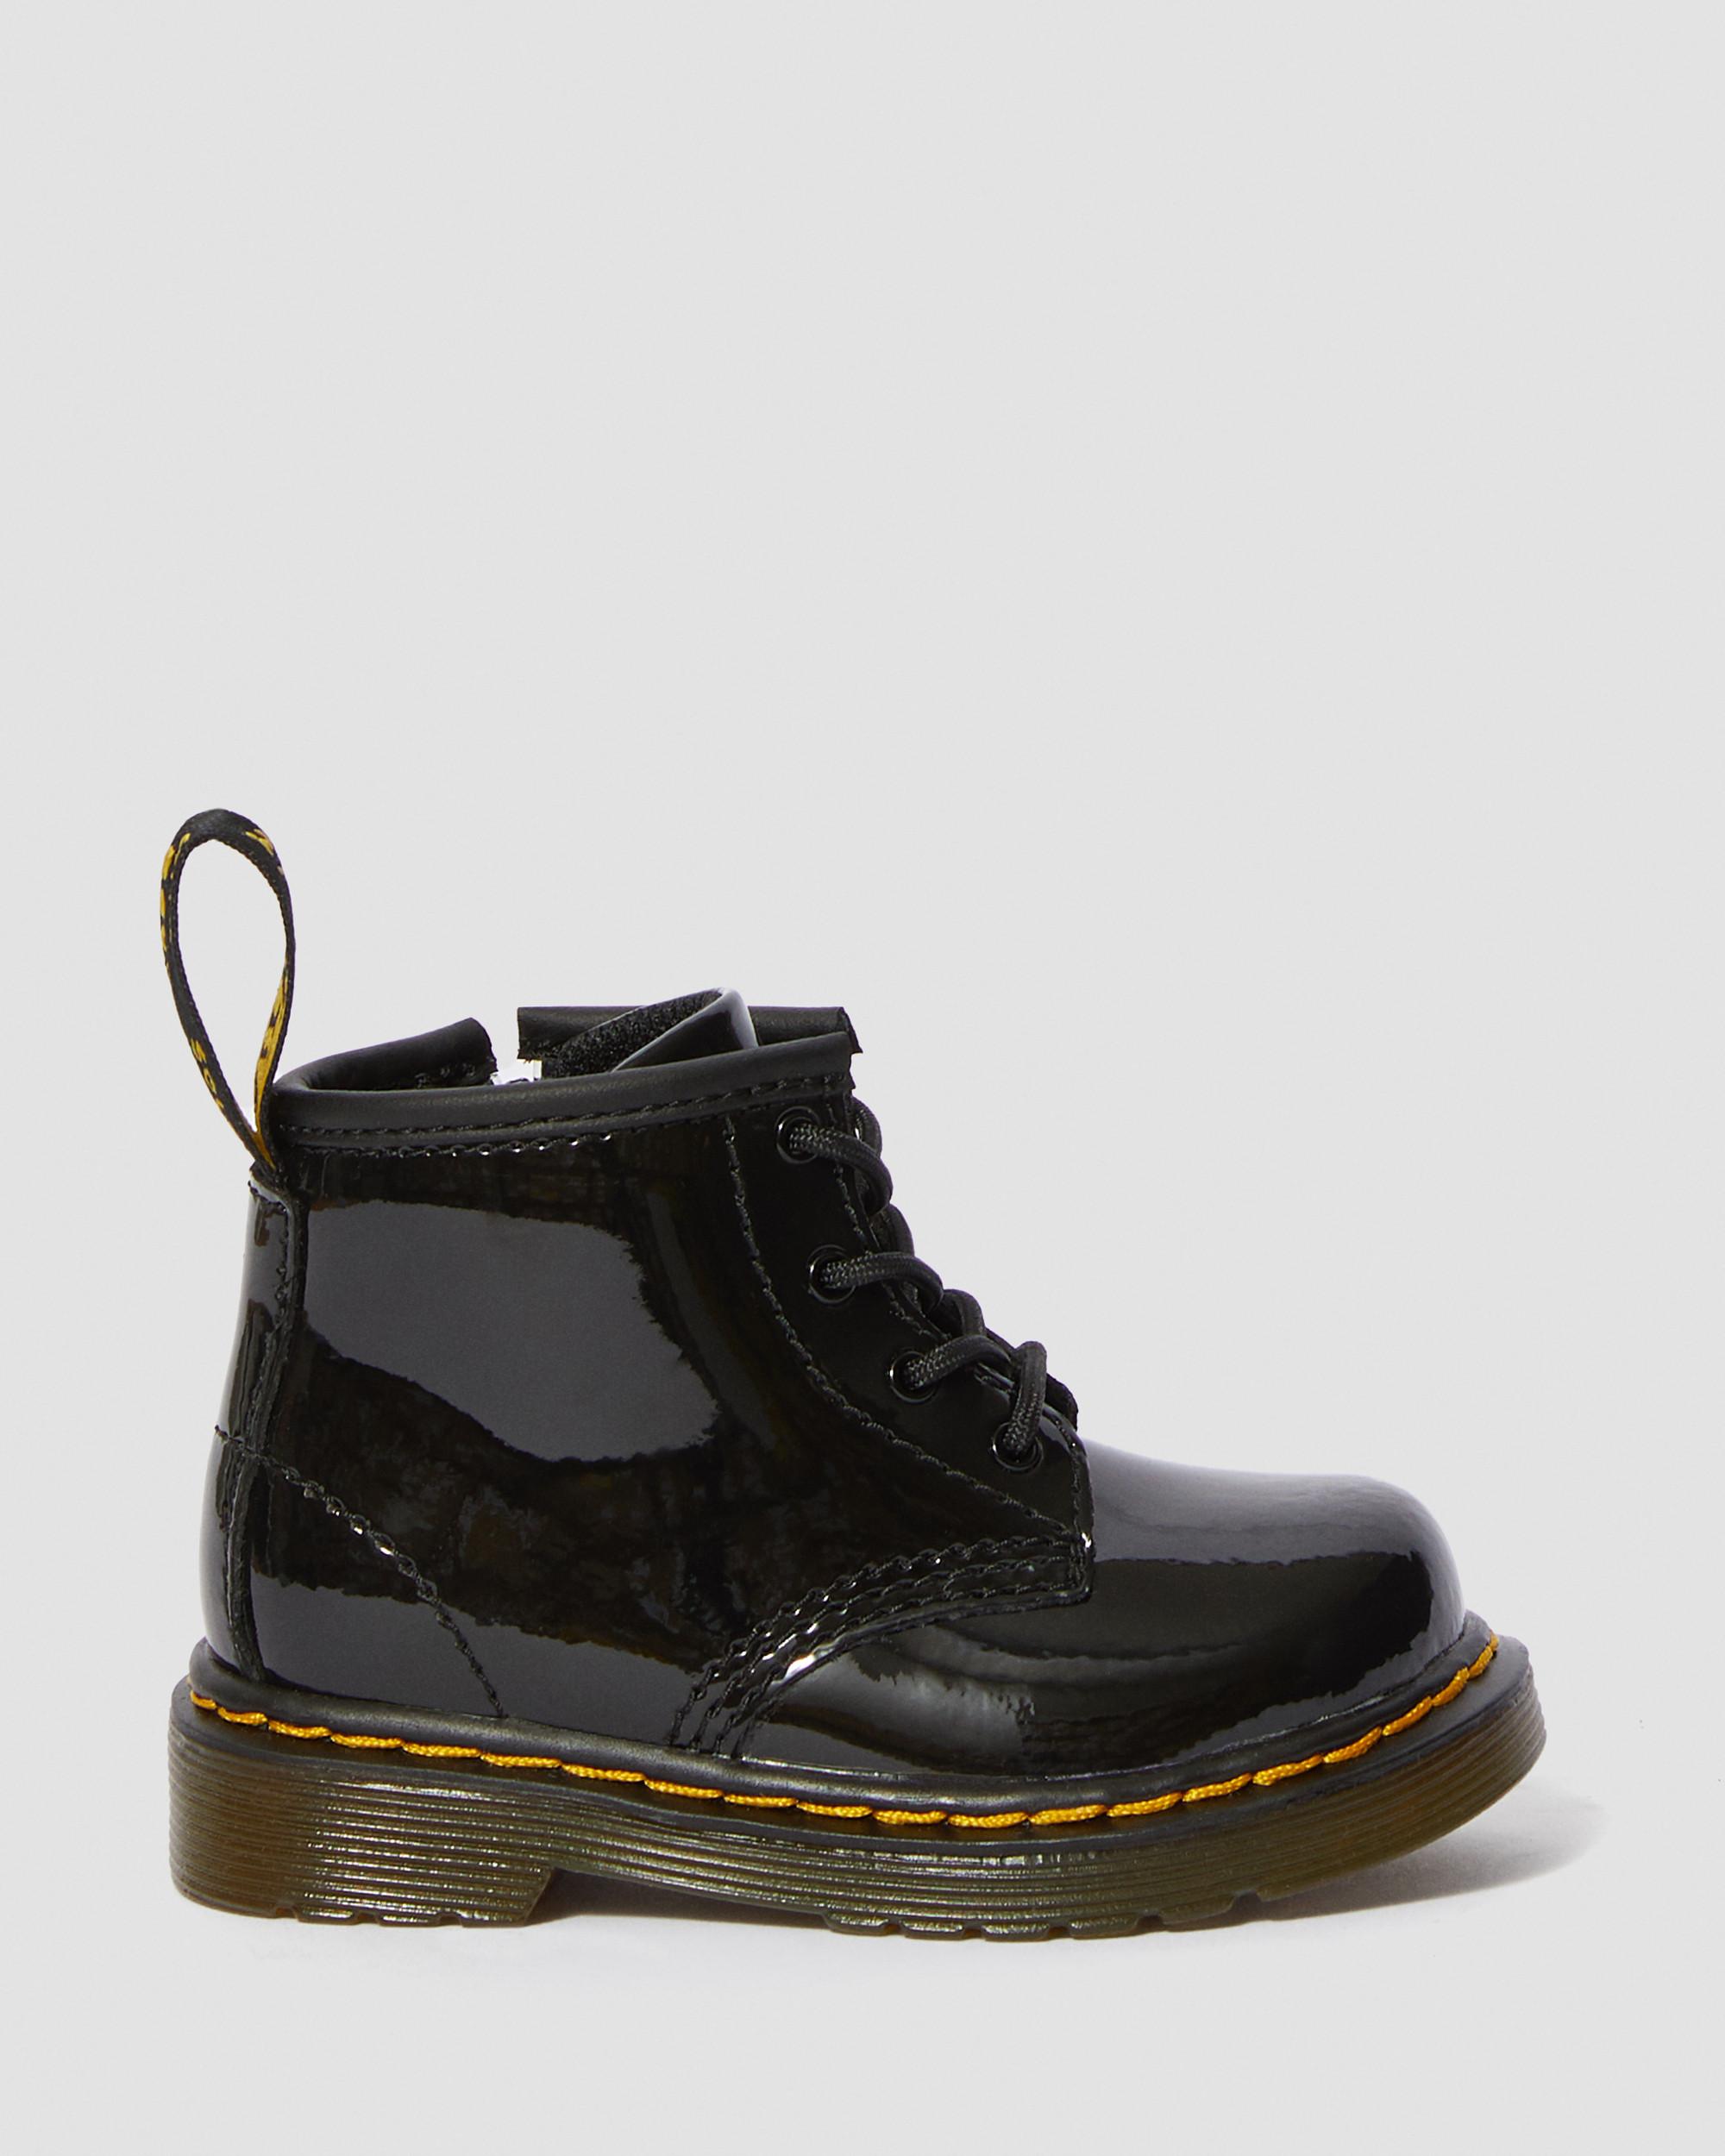 Infant 1460 Patent Leather Lace Up Boots in Black